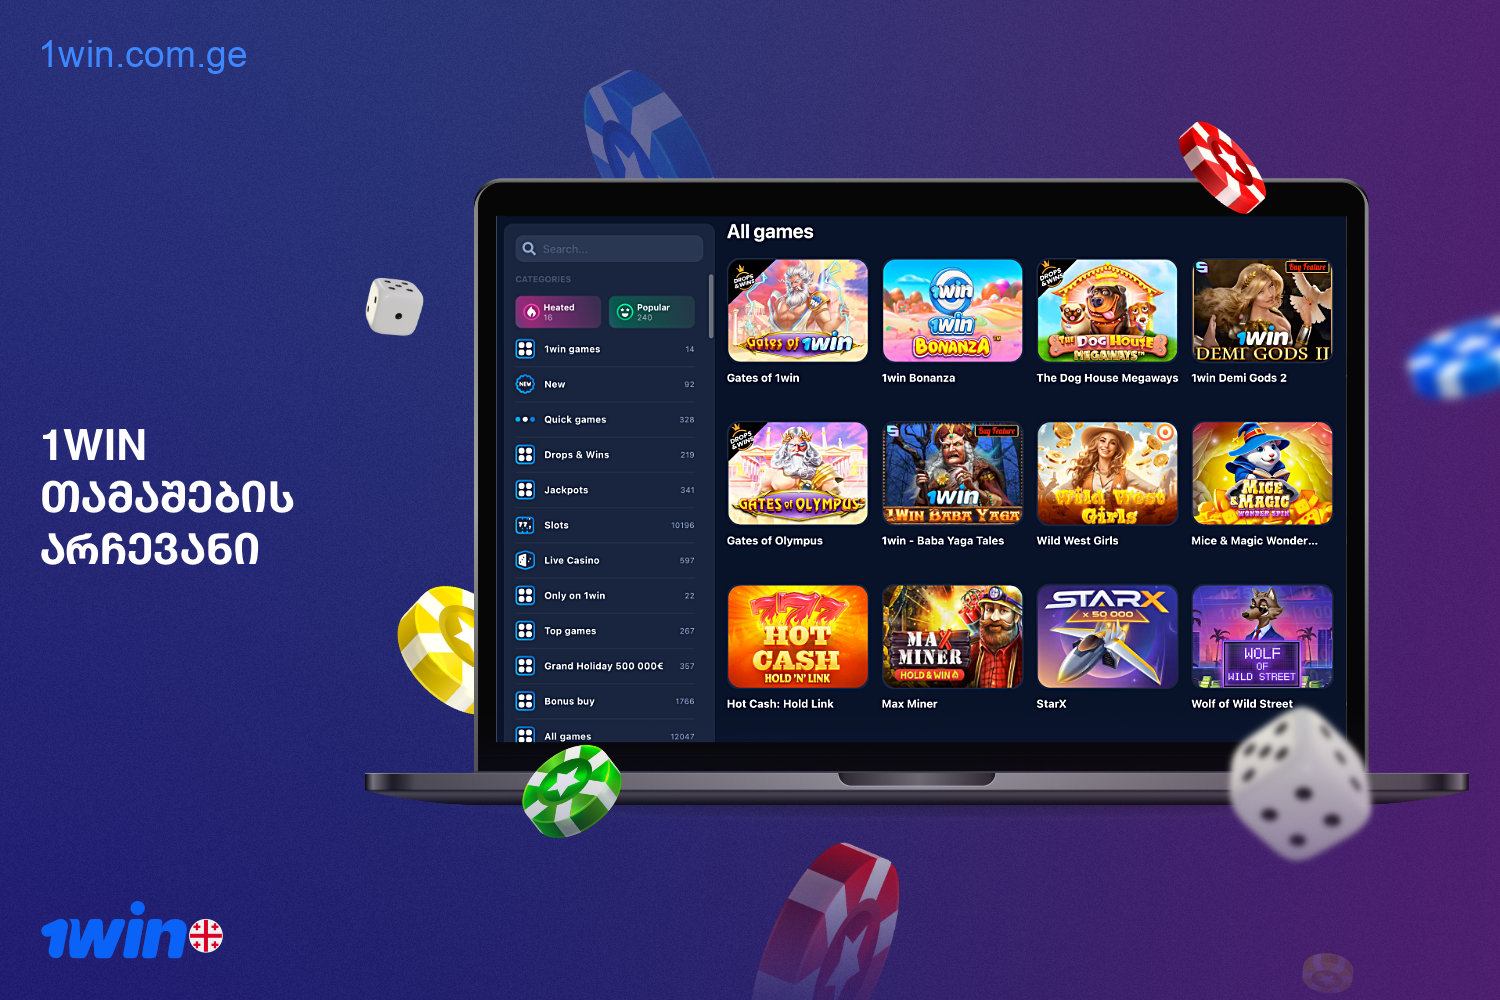 1win online casino has a huge collection of different games